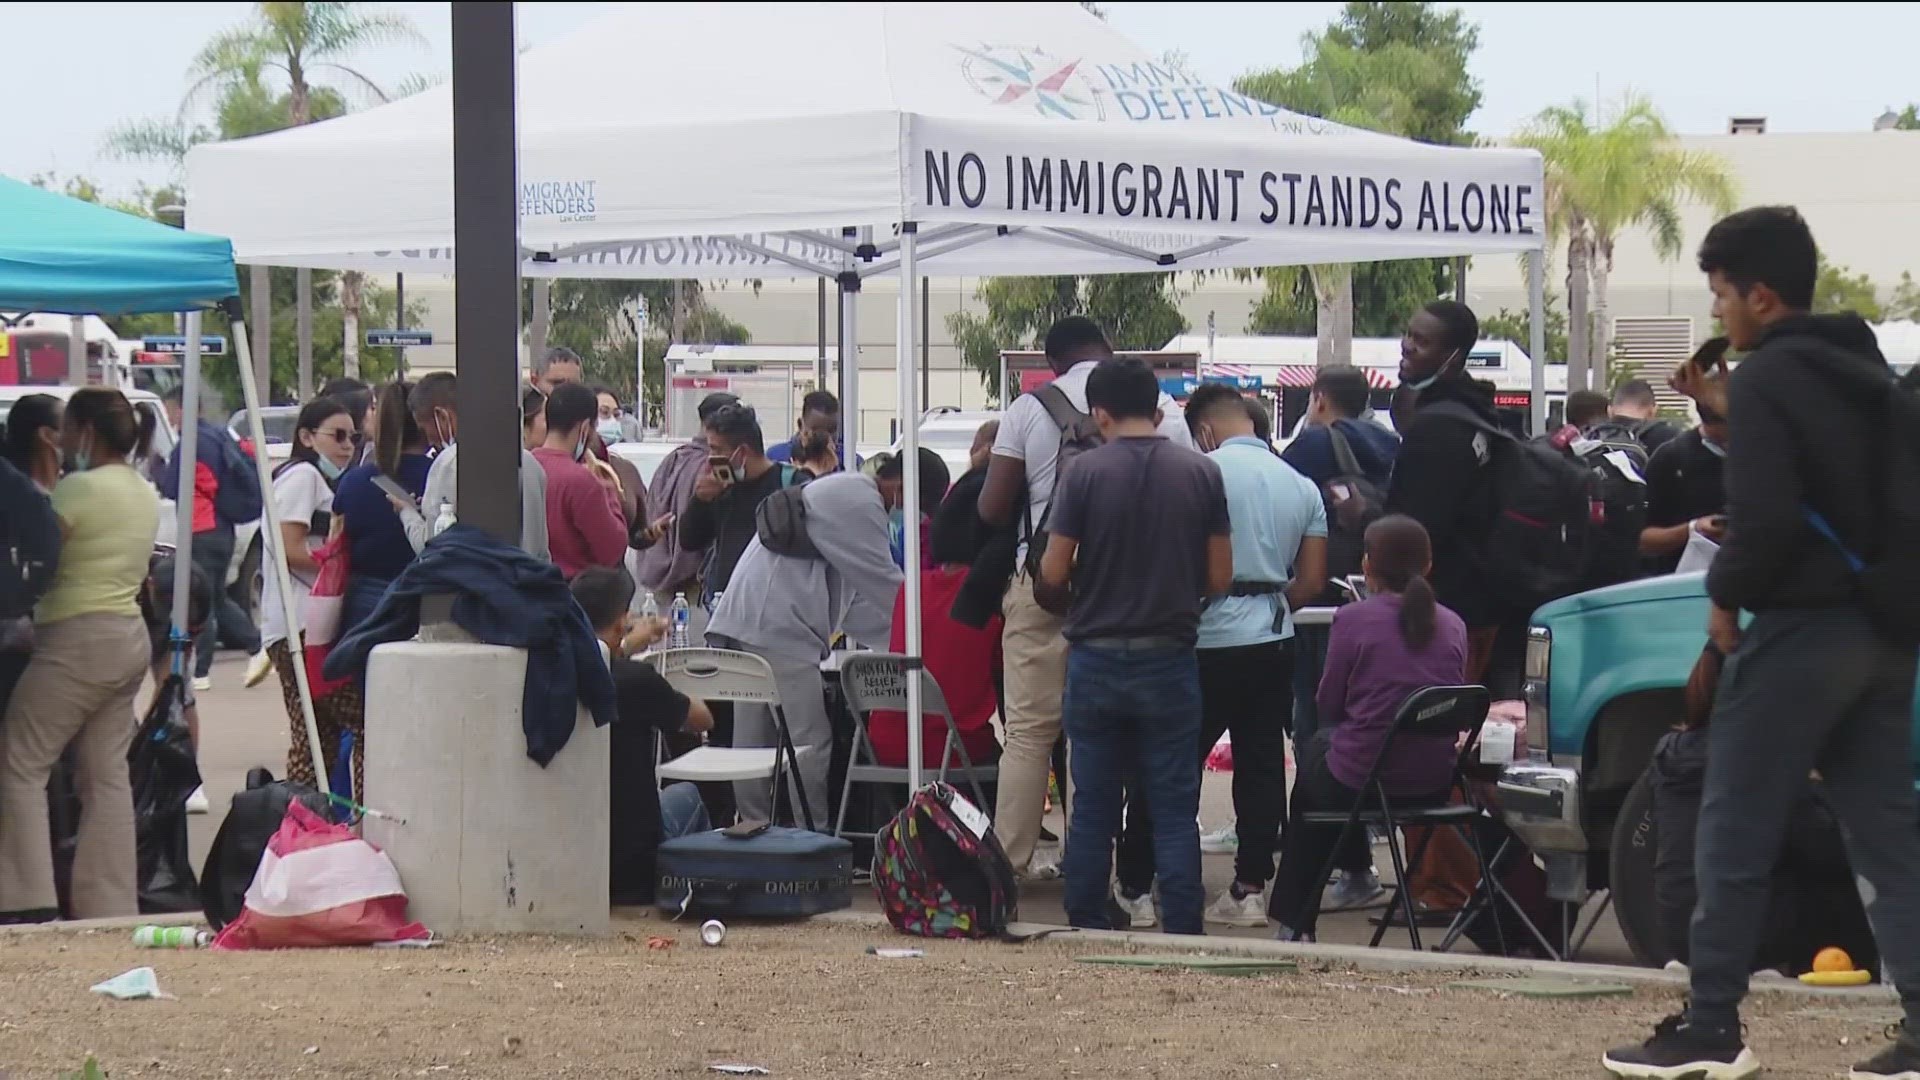 Jewish Family Services says it's "receiving only the most vulnerable asylum seekers released by DHS."